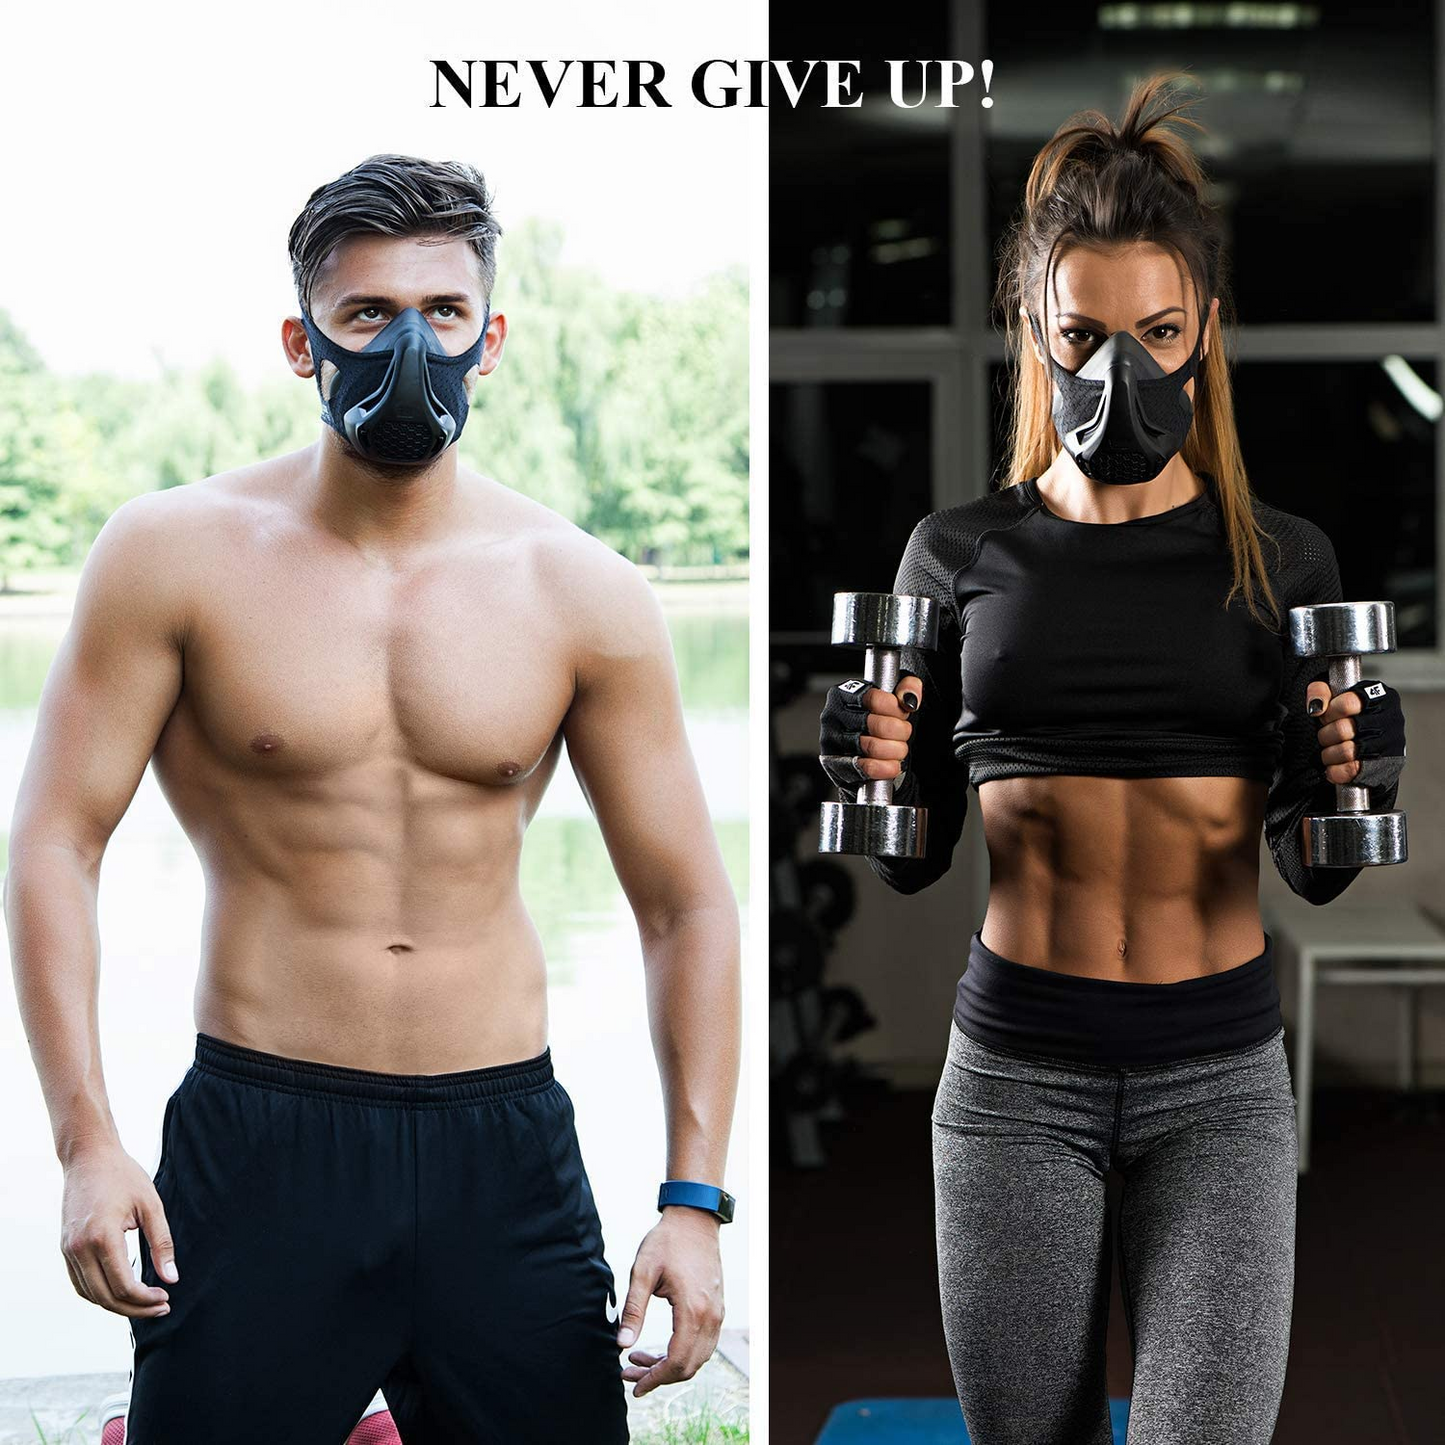 Elevation Resistance Training Cardio Workout Sports Mask With 24 levels